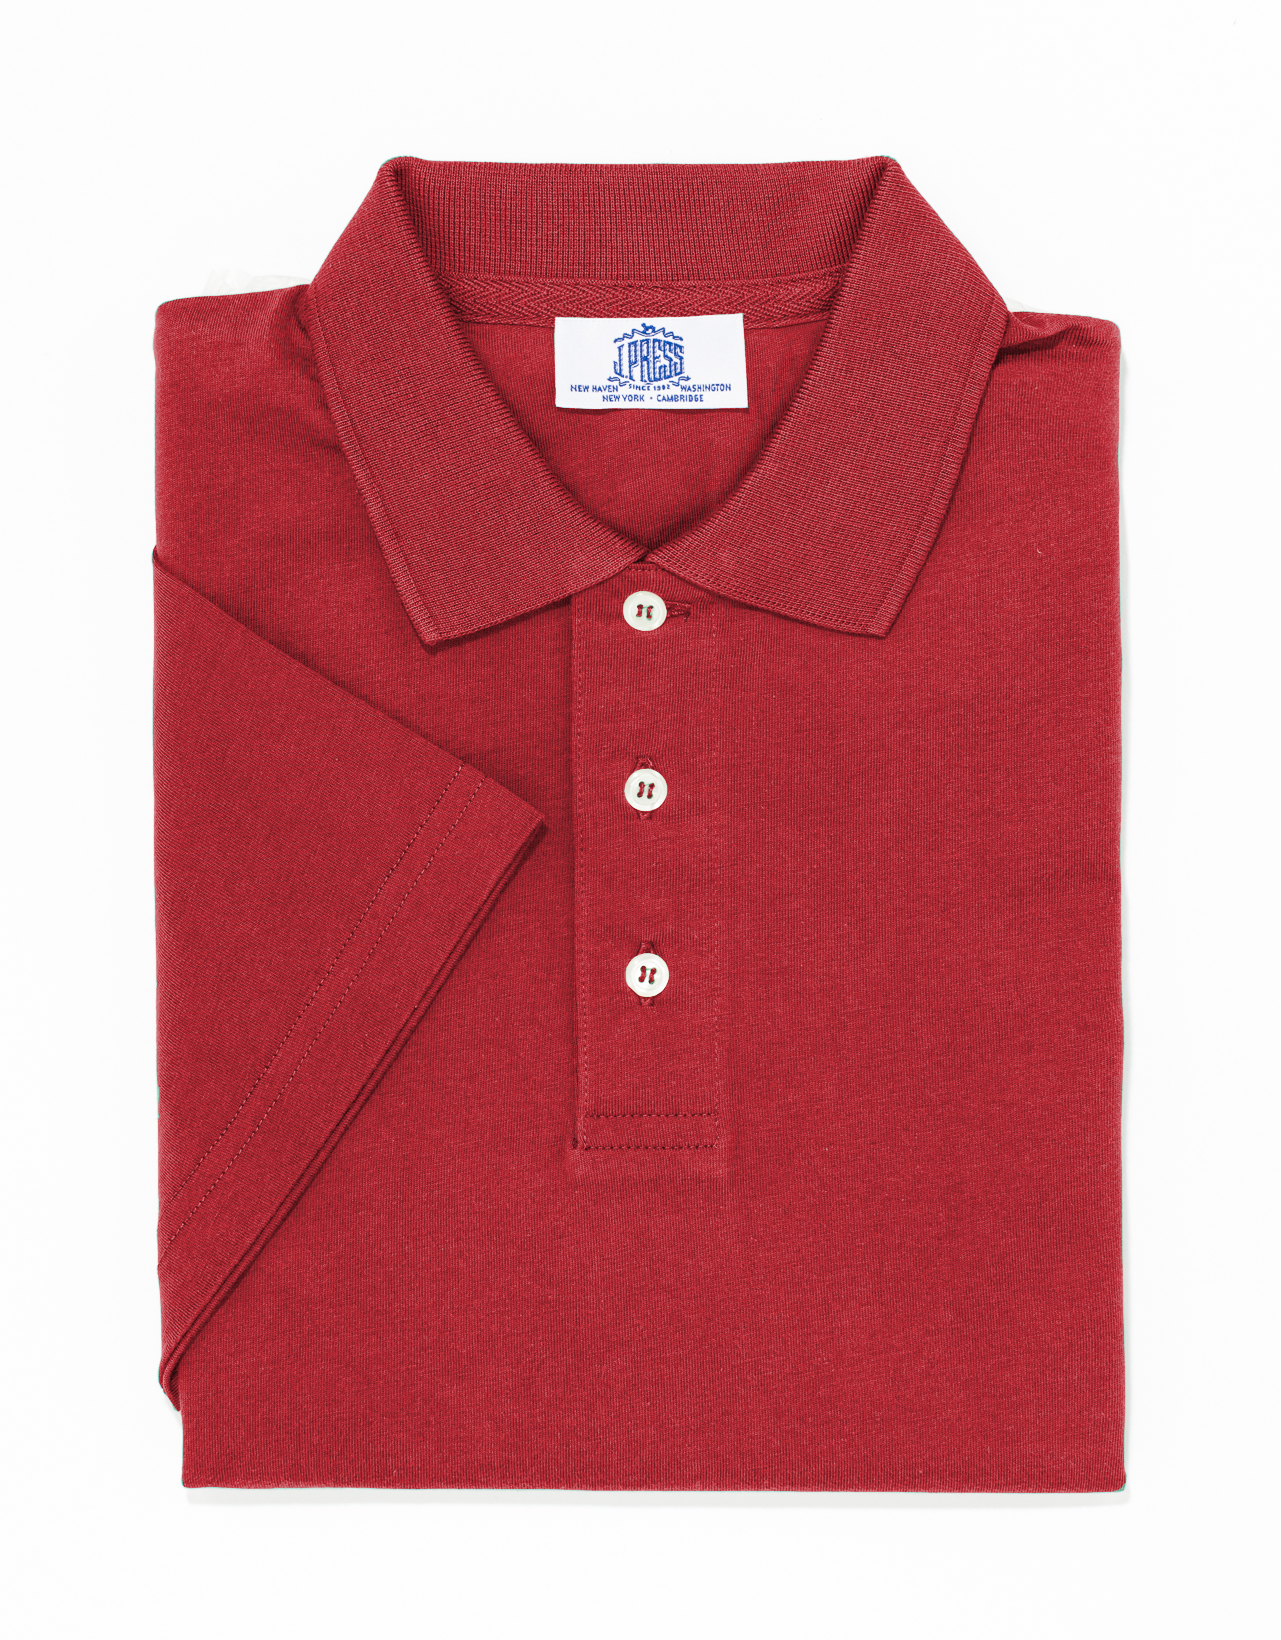 JERSEY POLO SHIRT - RED